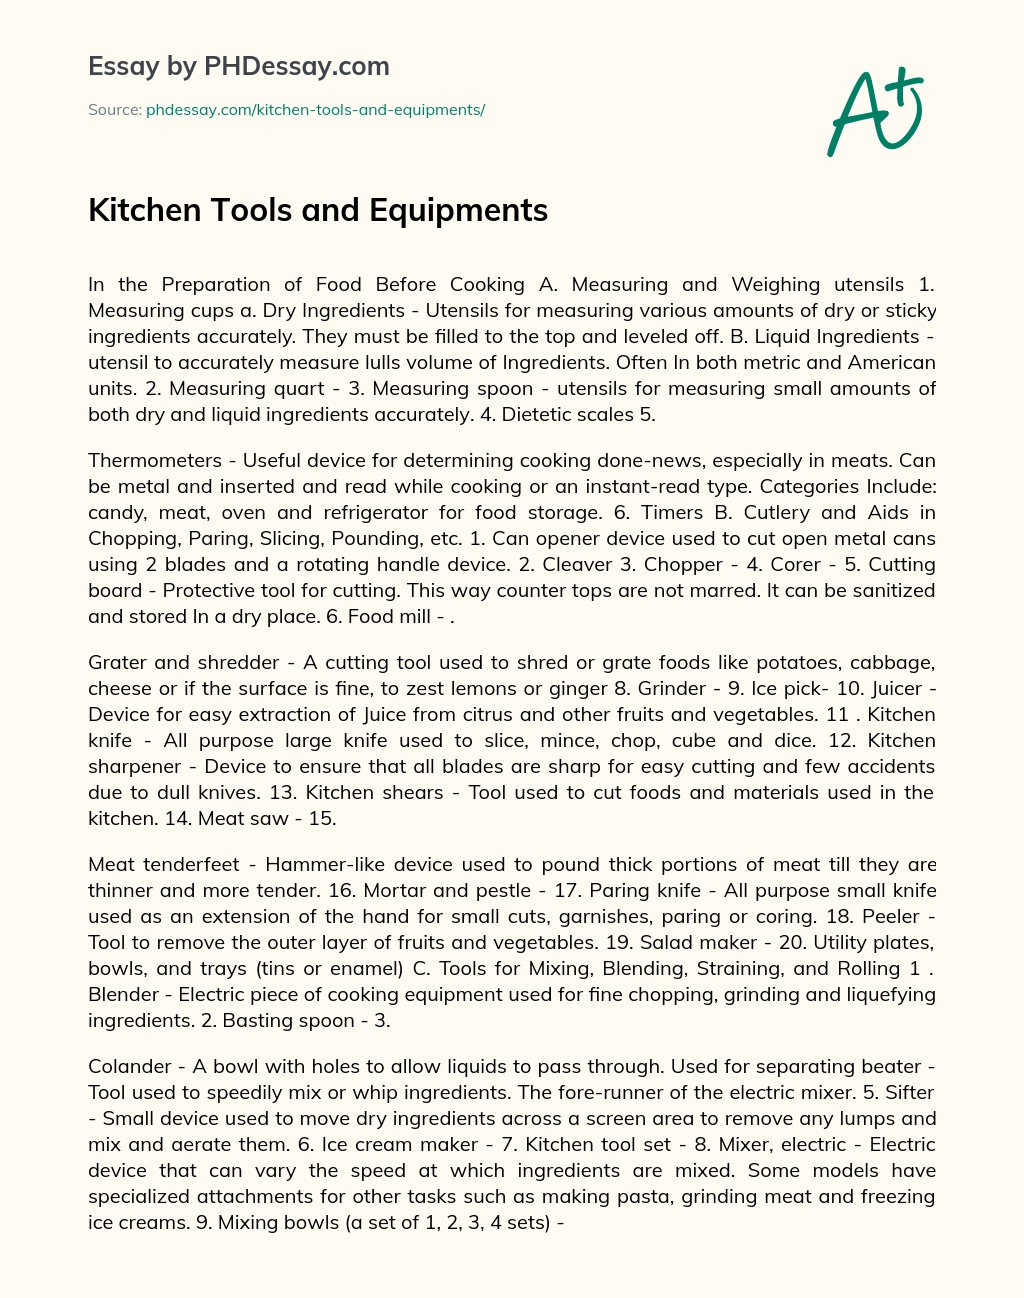 Kitchen Tools And Equipments Process And Thesis Essay - PHDessay.com